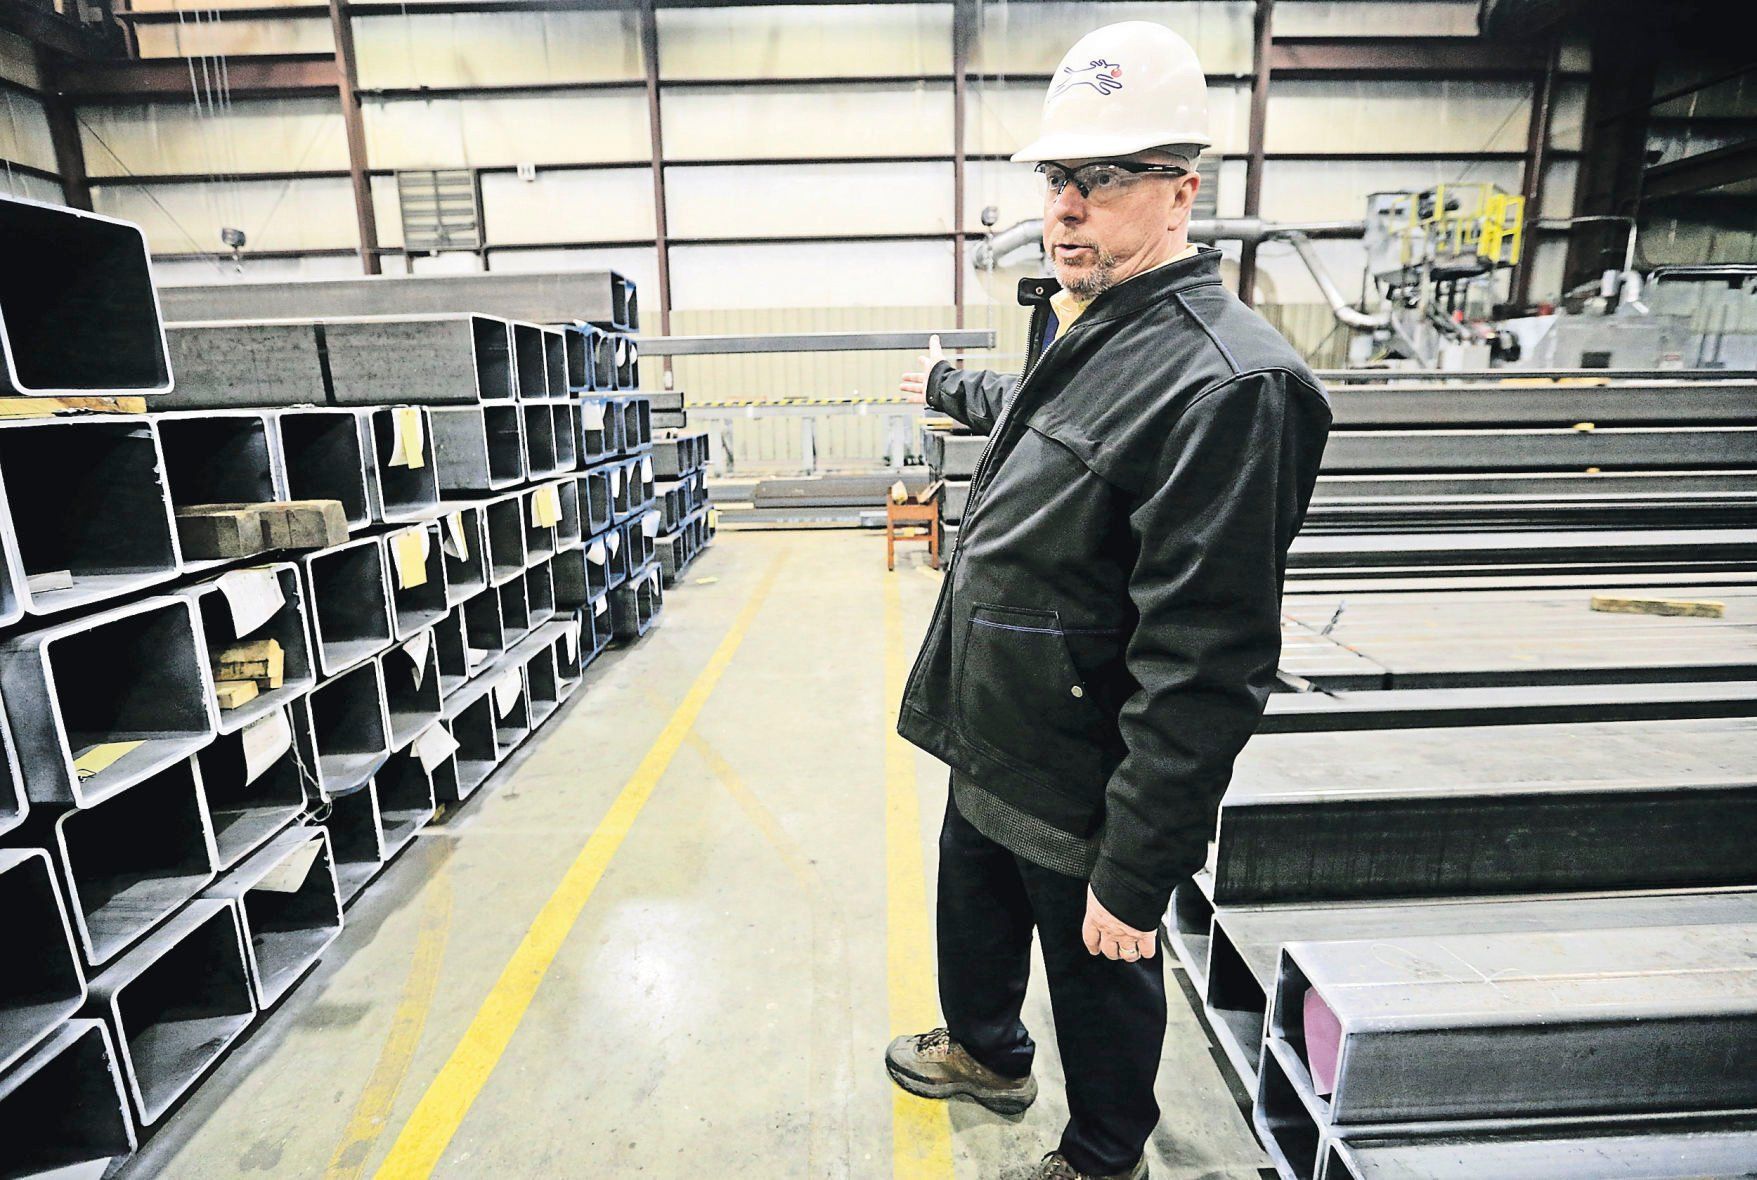 Jim Boedeker, regional general manager of Kloeckner Metals, gives a tour at the facility in Dubuque.    PHOTO CREDIT: JESSICA REILLY